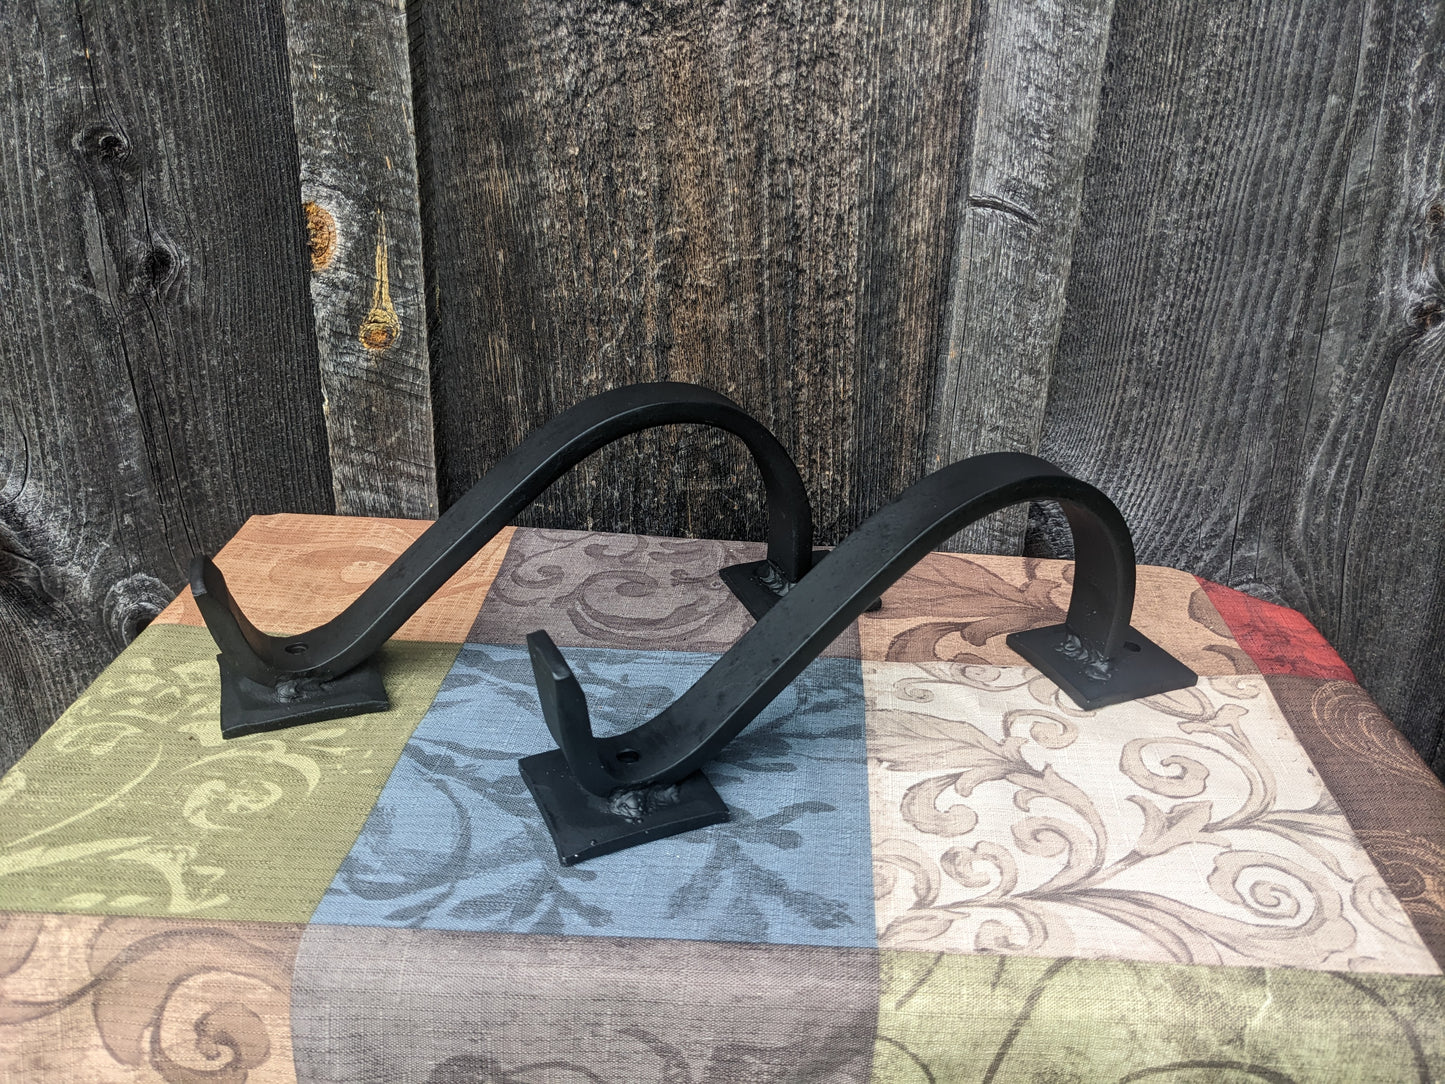 Set of 2 Gracefully Curved Hand Forged Door Pulls